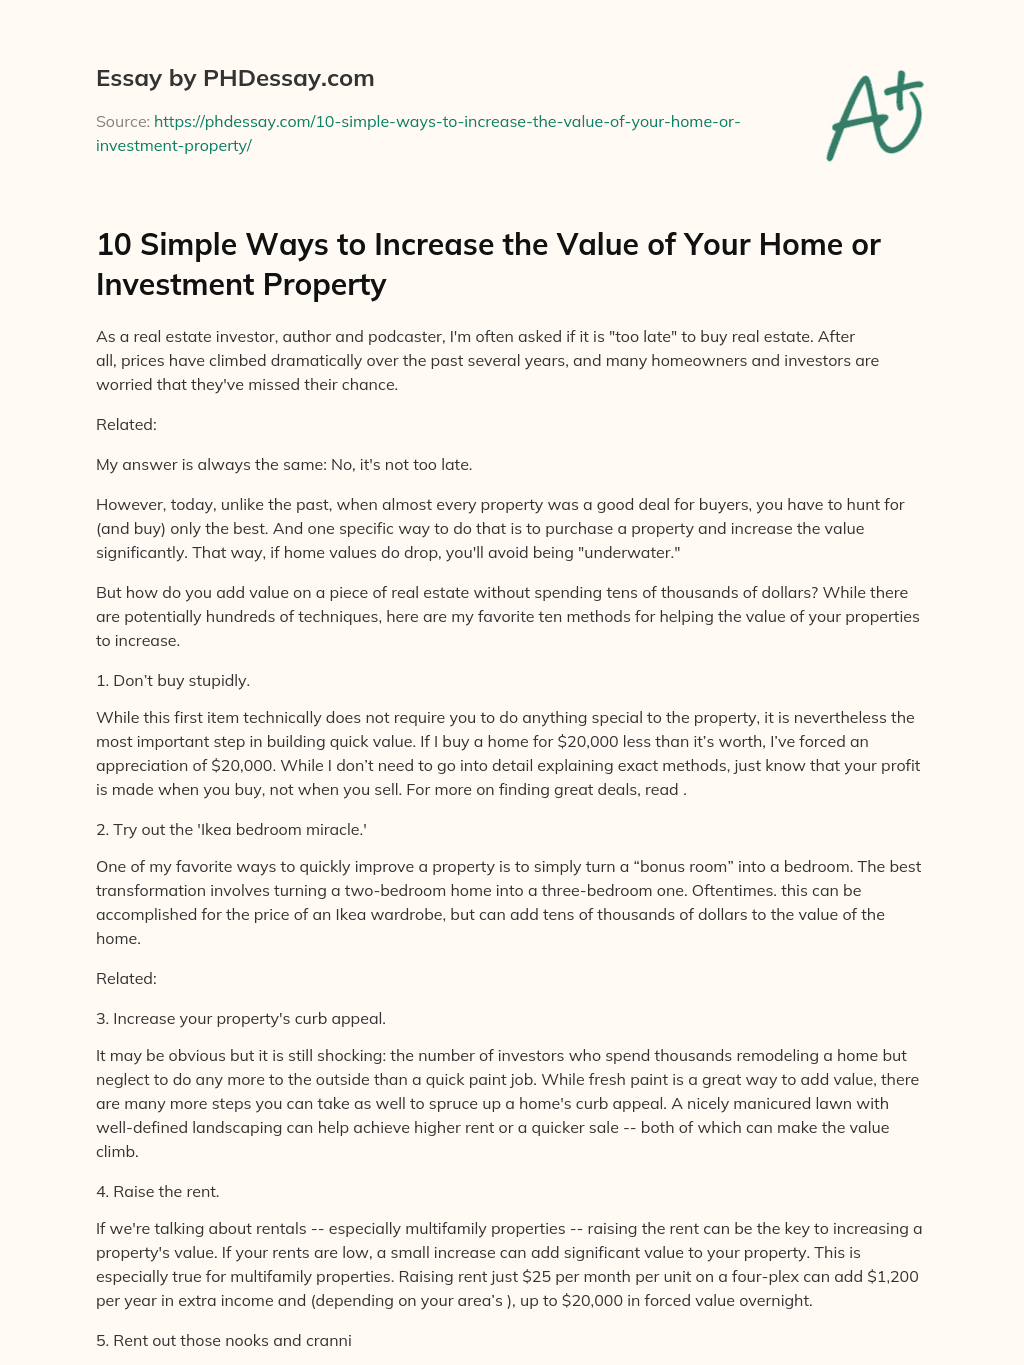 10 Simple Ways to Increase the Value of Your Home or Investment Property essay